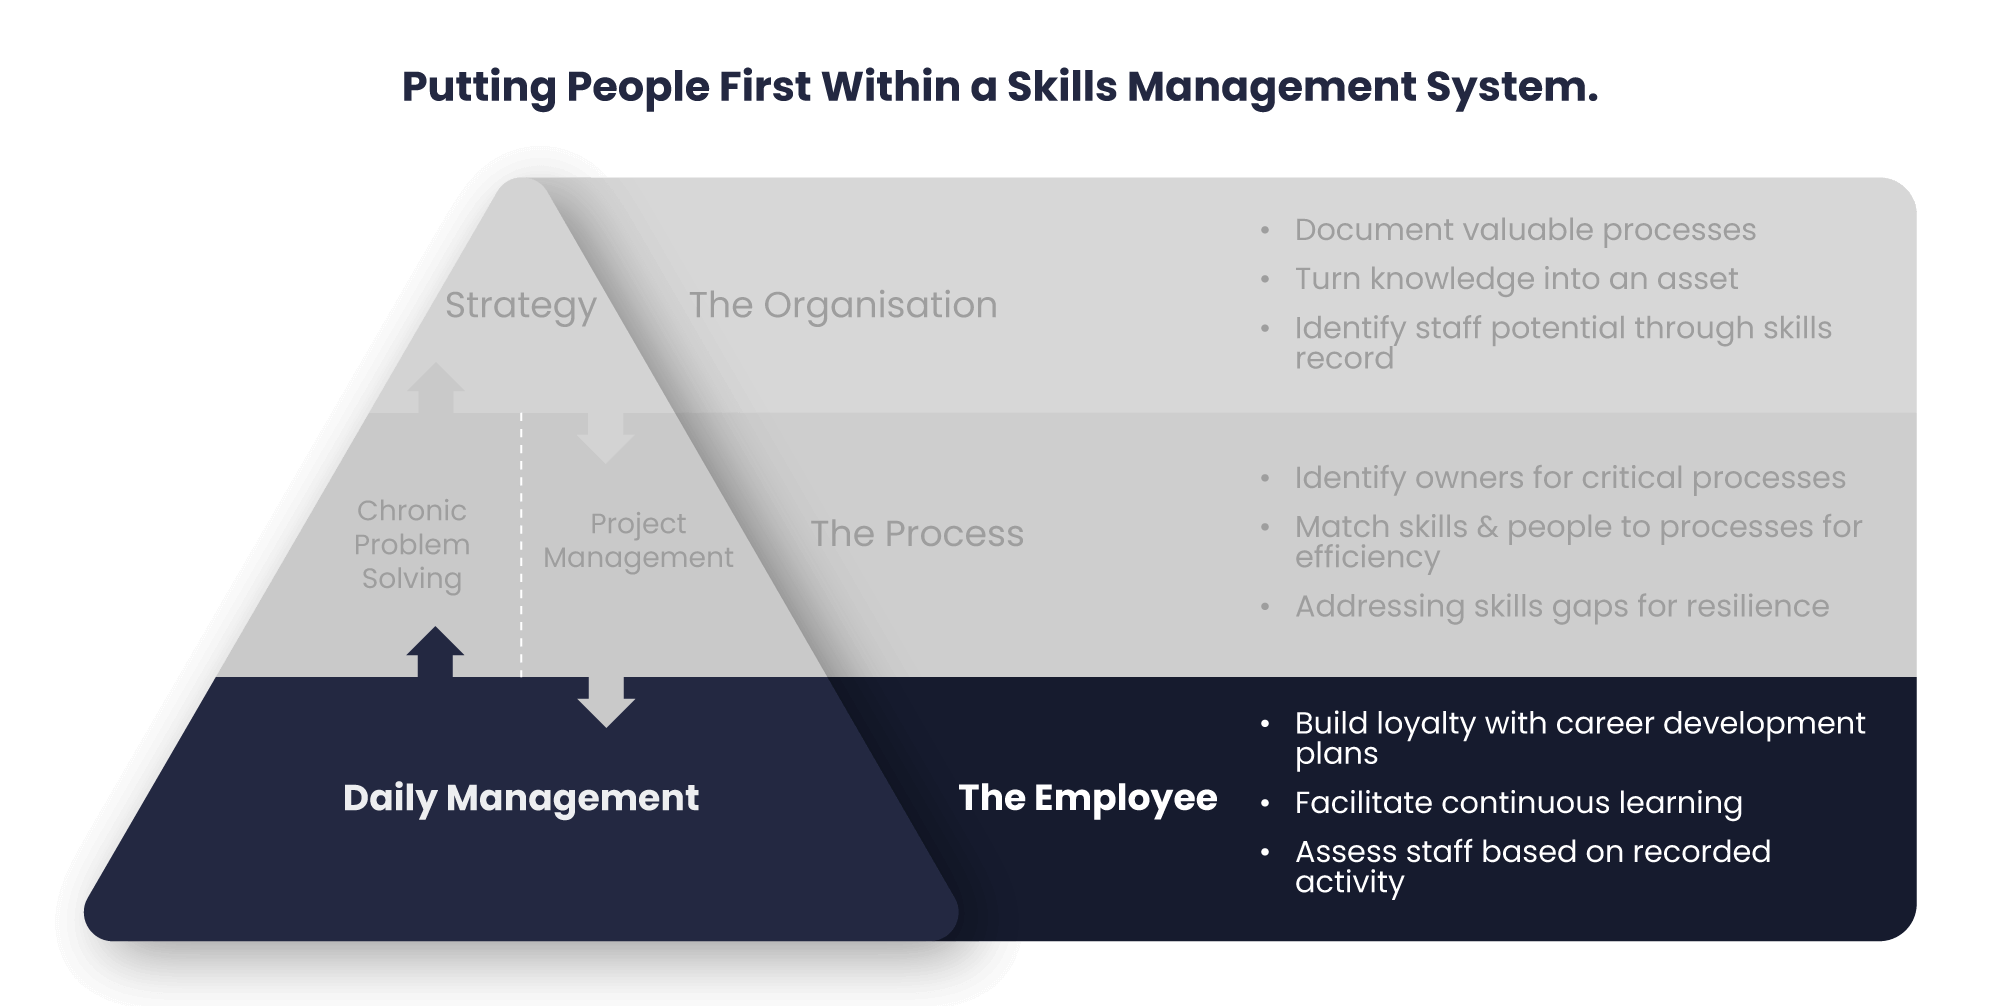 Putting People First in Skills Management System